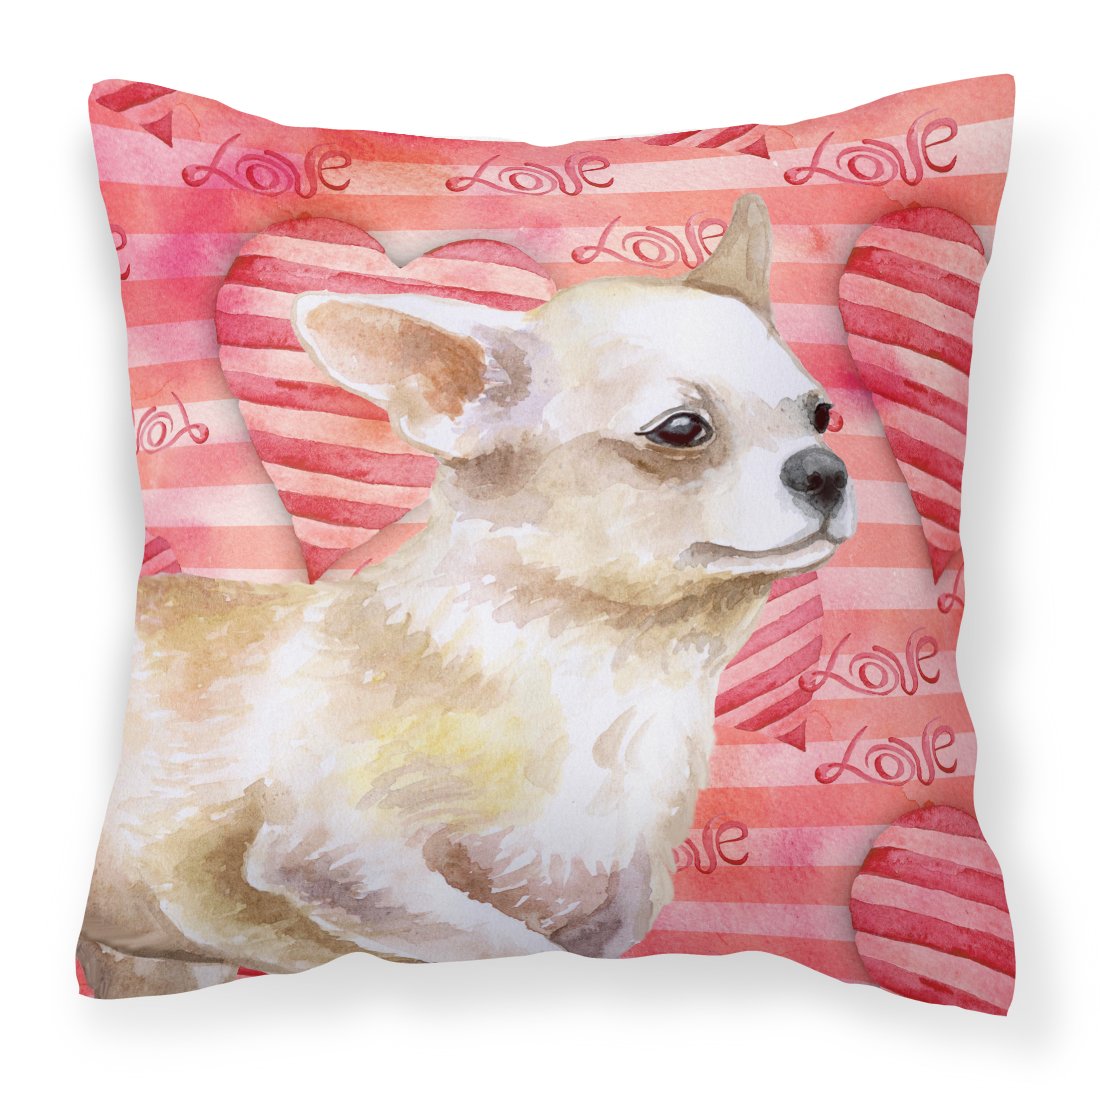 Chihuahua Leg up Love Fabric Decorative Pillow BB9784PW1818 by Caroline's Treasures